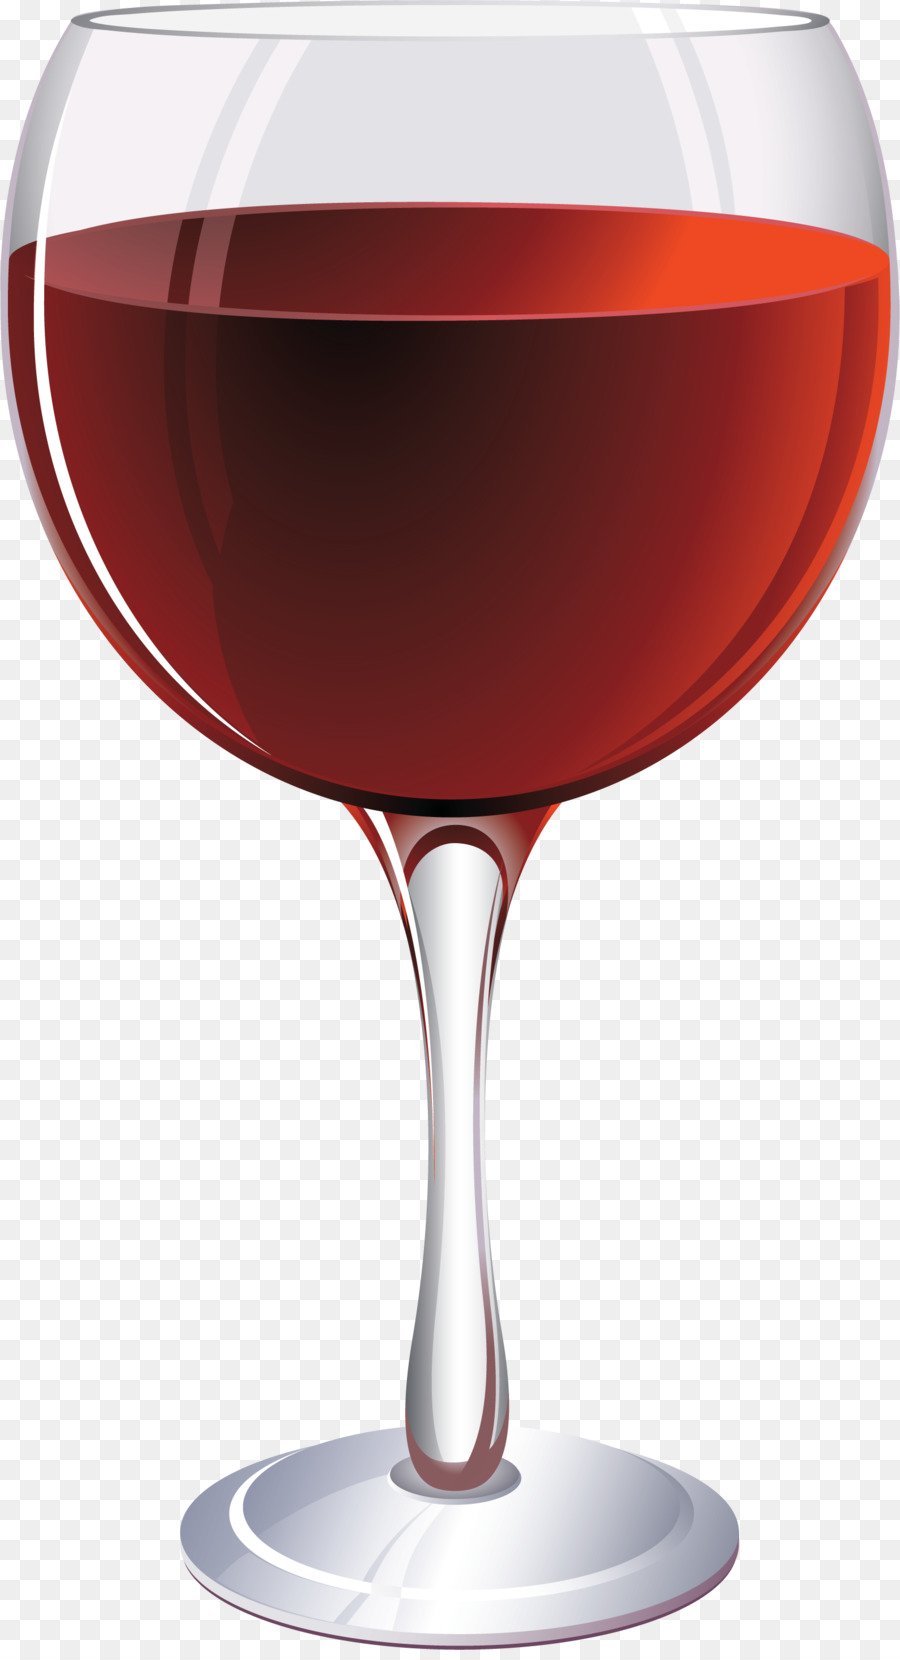 White wine Champagne Wine glass - pomegranate png download - 1588*2912 - Free Transparent Wine png Download.